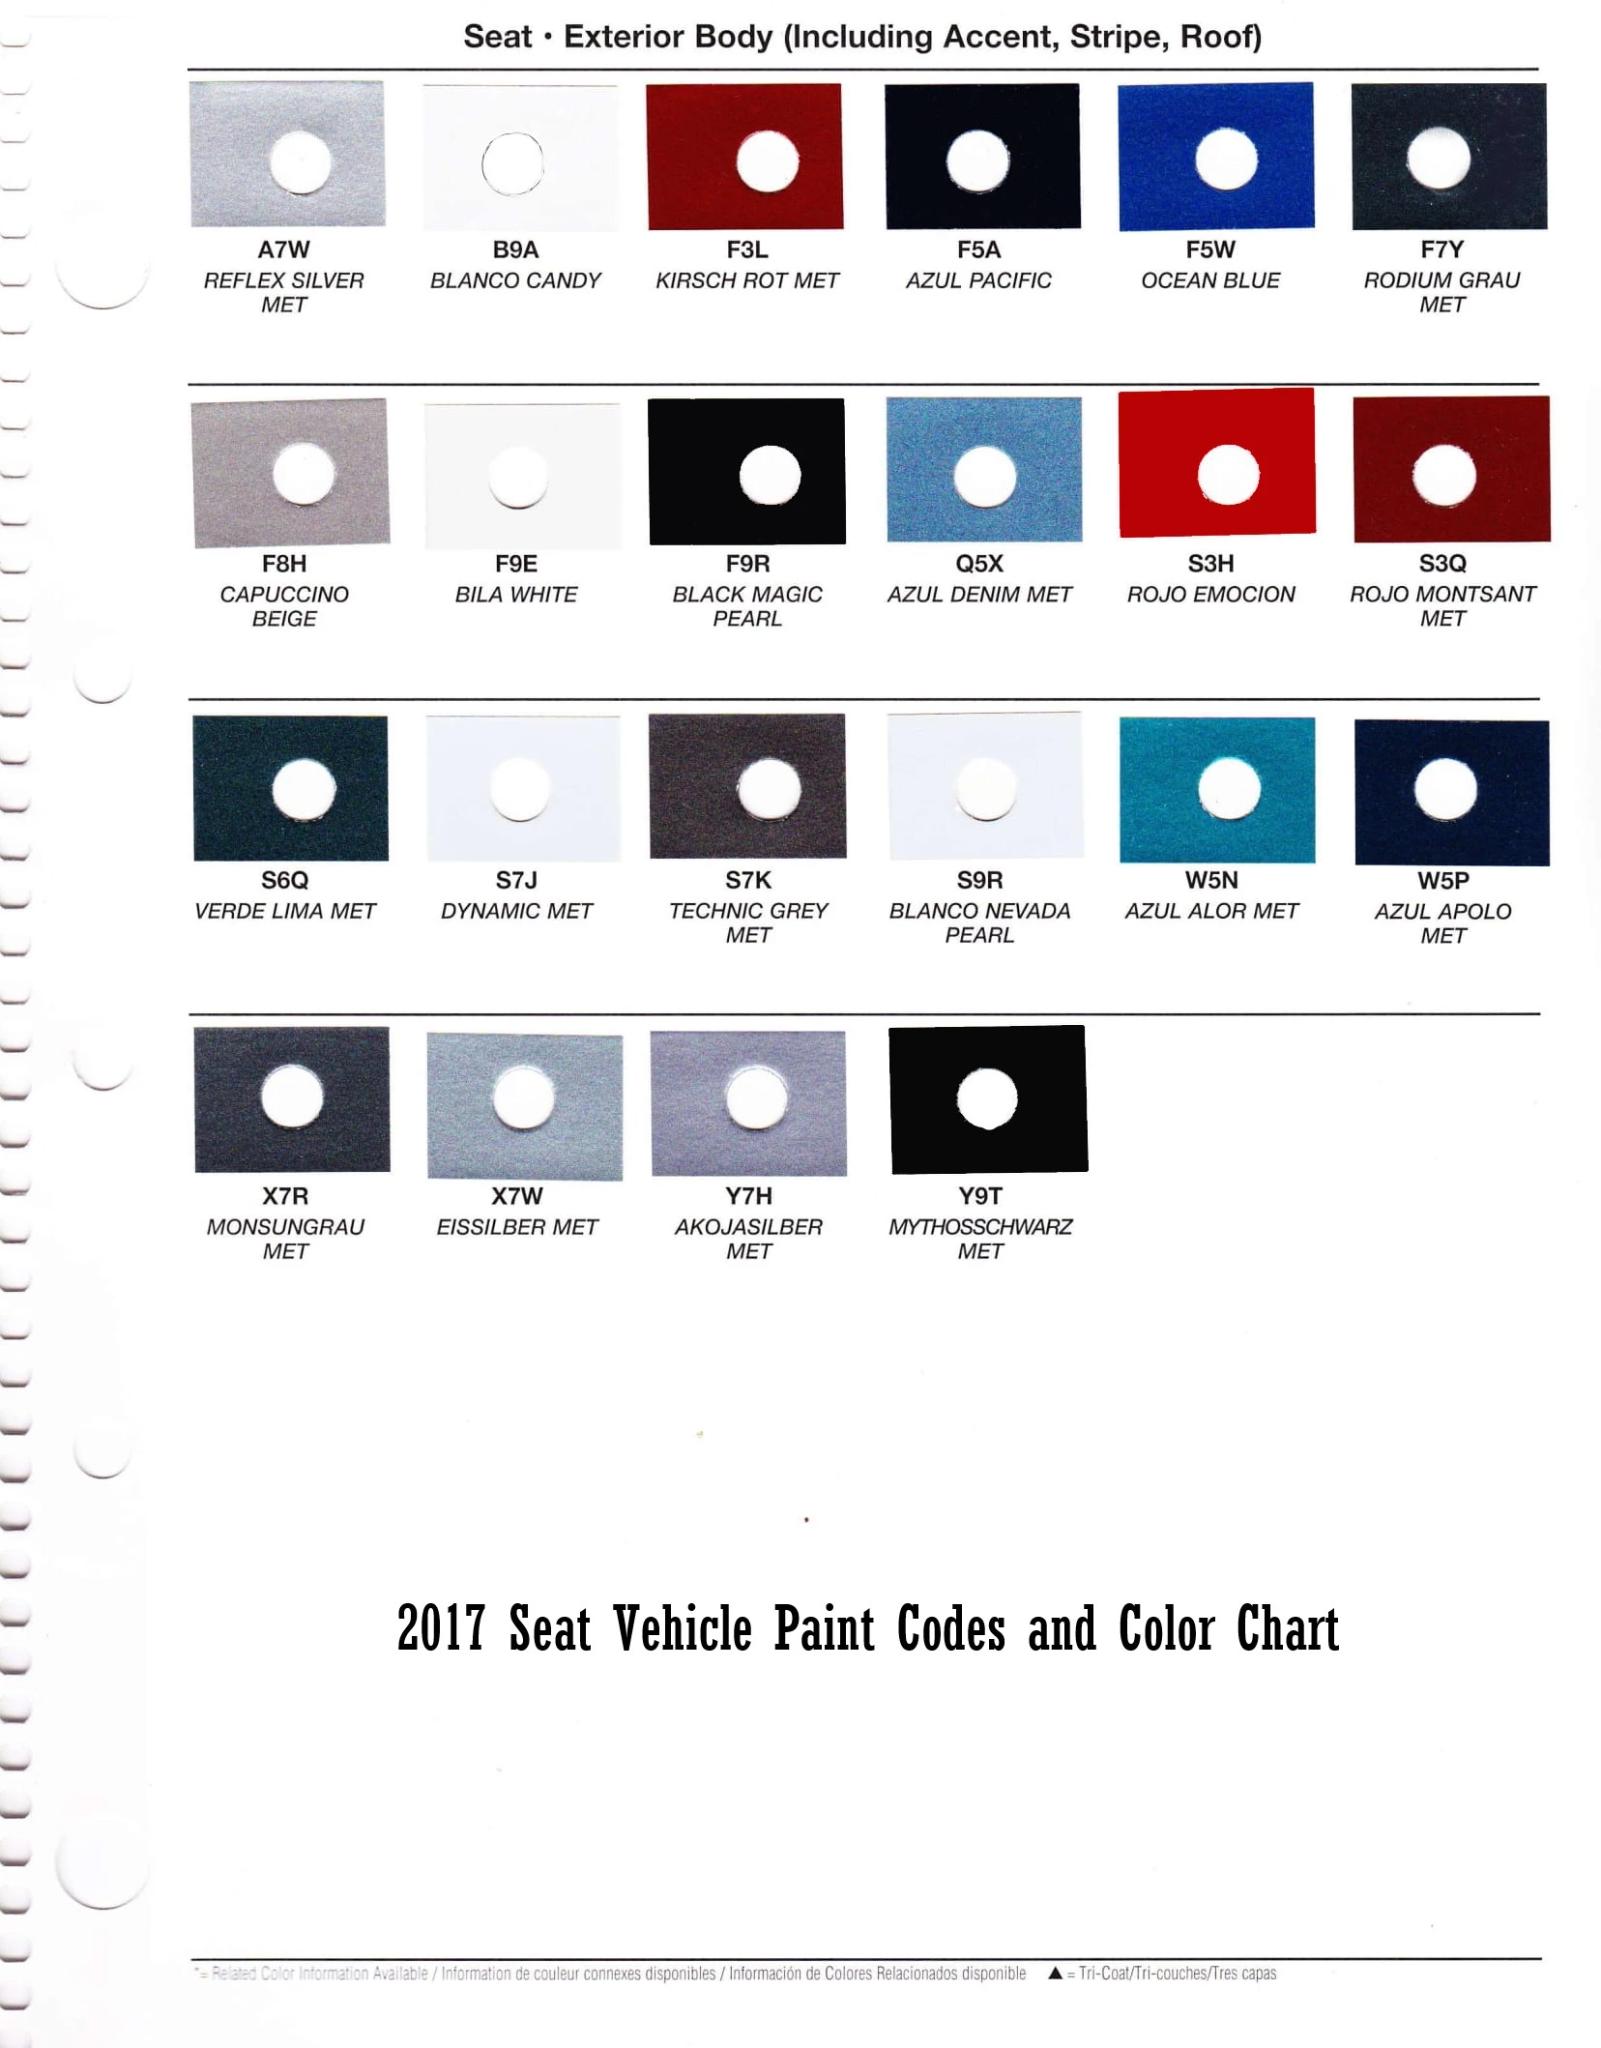 Exterior Colors and Codes used on 2017 Seat Vehicles paint chart